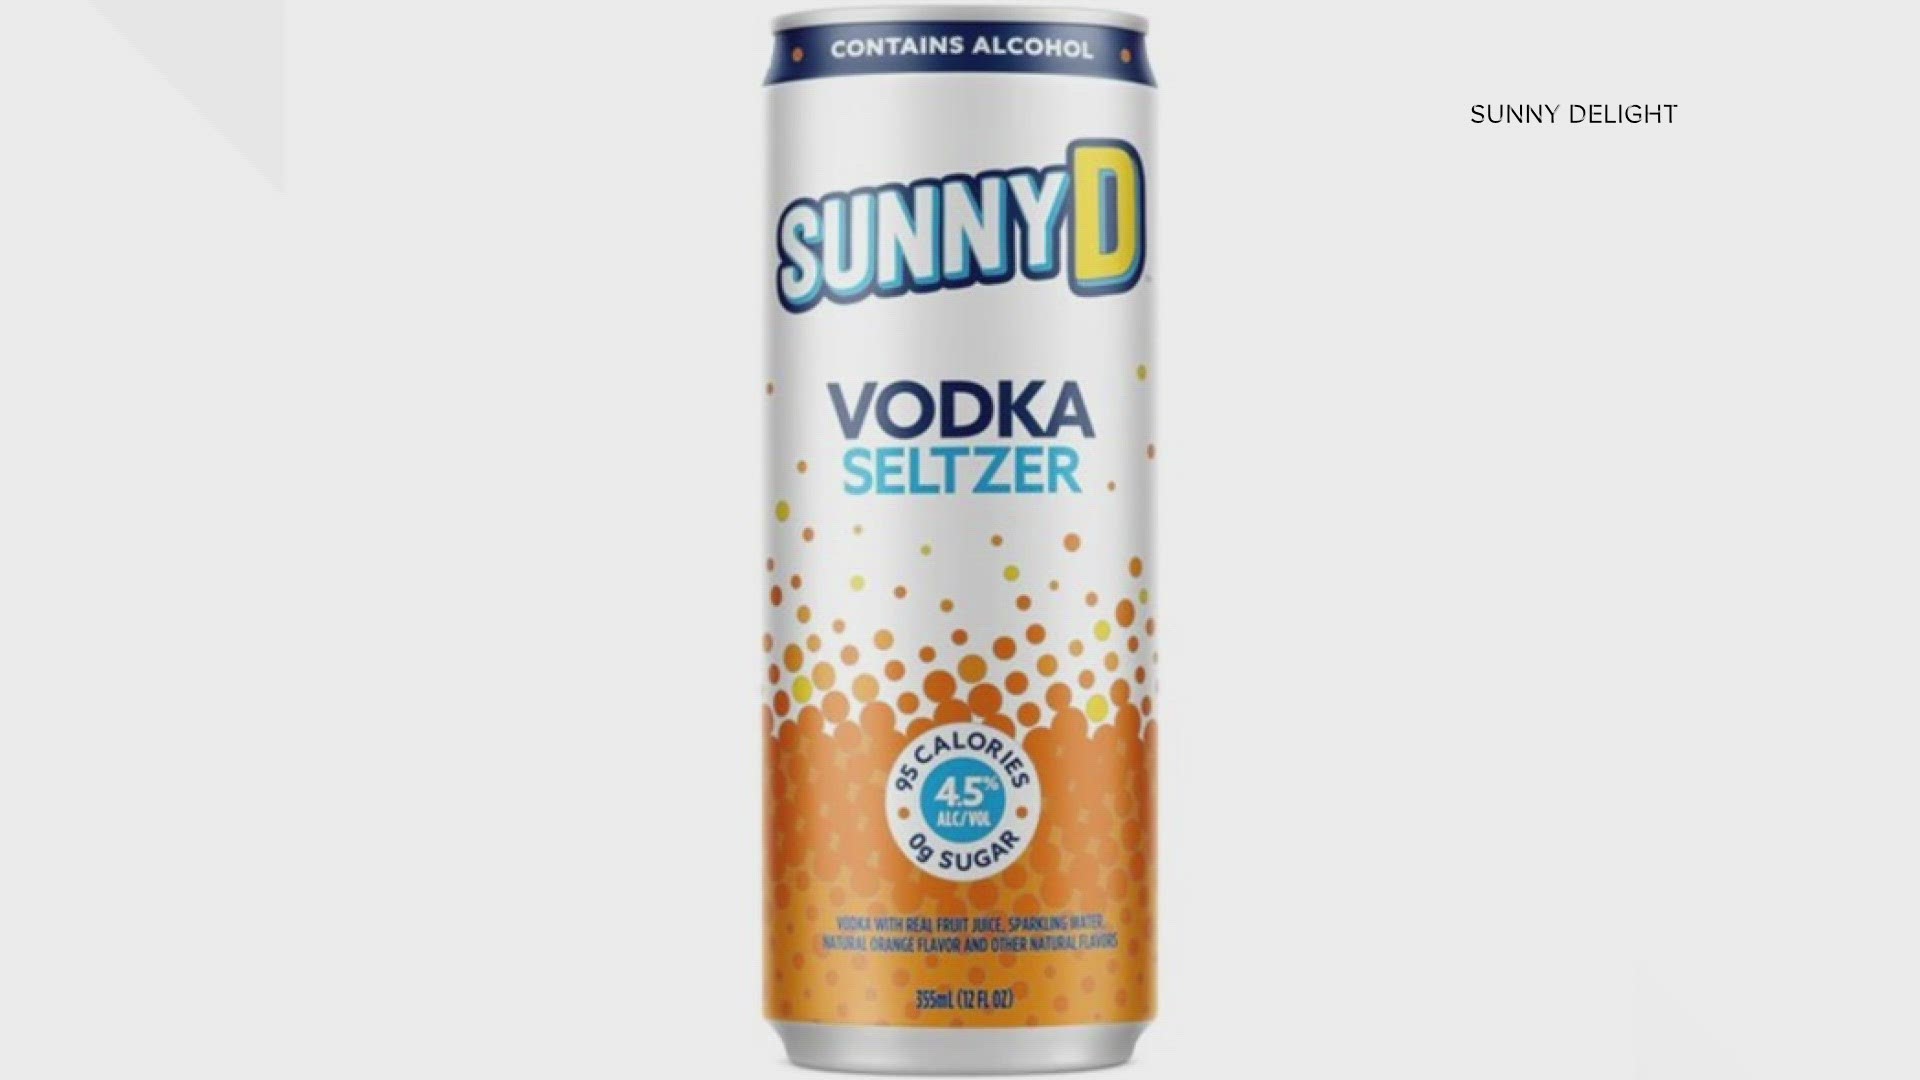 Sunny Delight is entering the liquor aisle with a new orange seltzer.